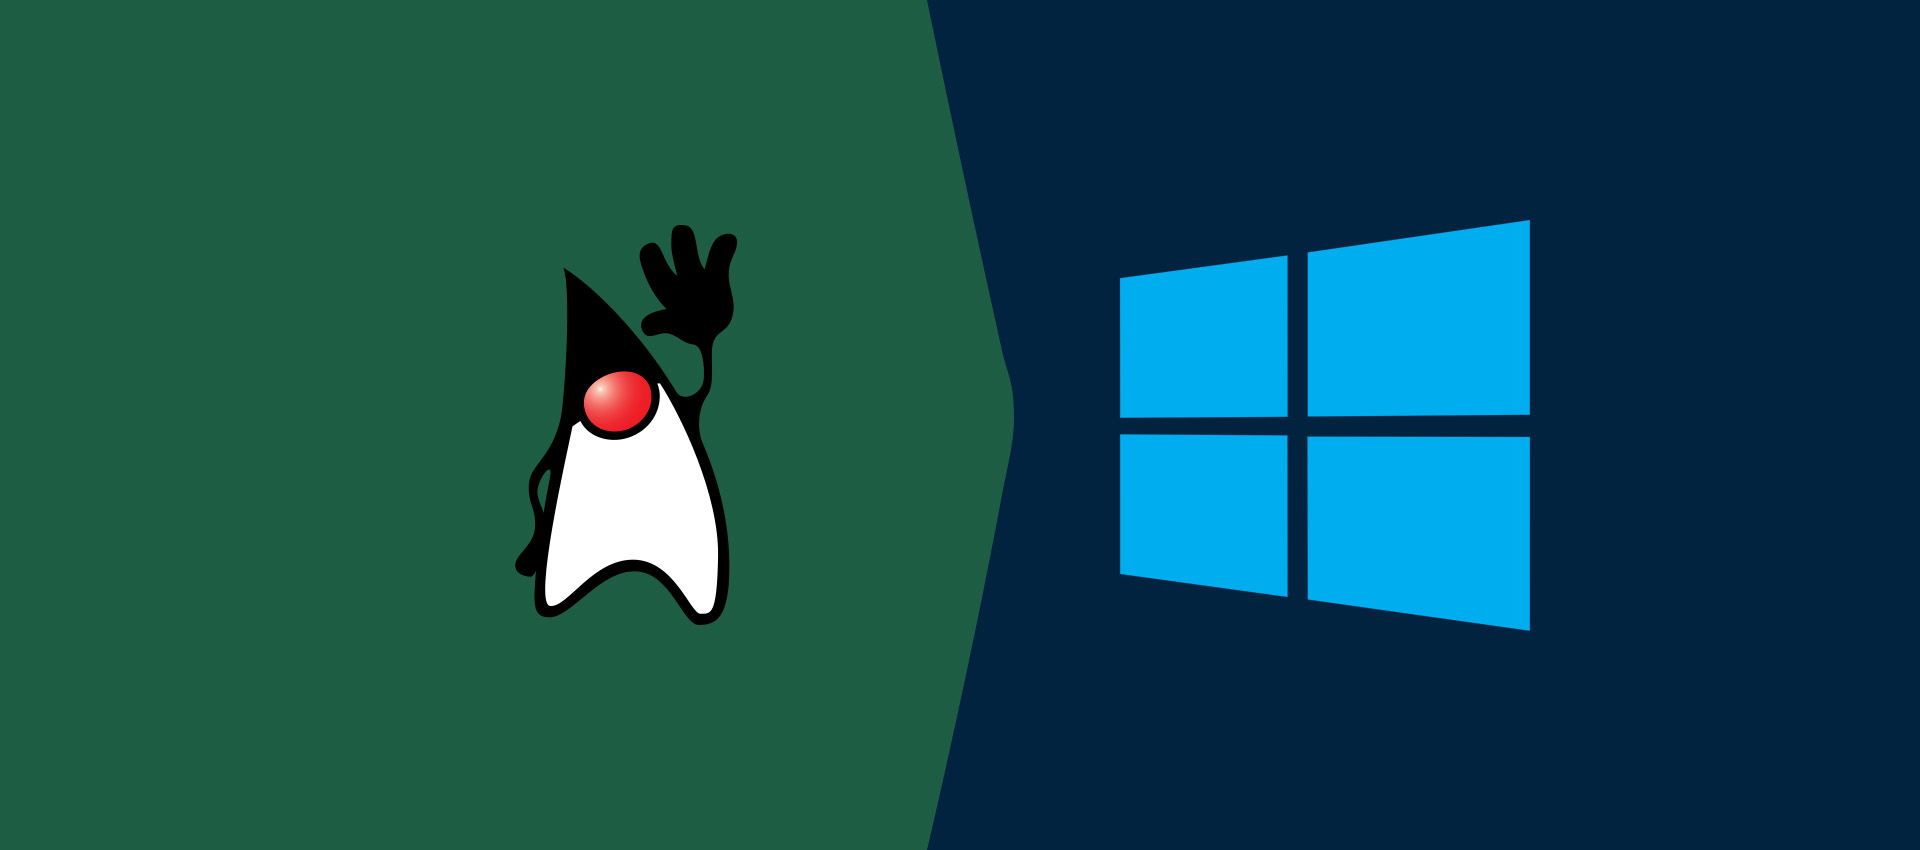 How To Install OpenJDK 12 On Windows